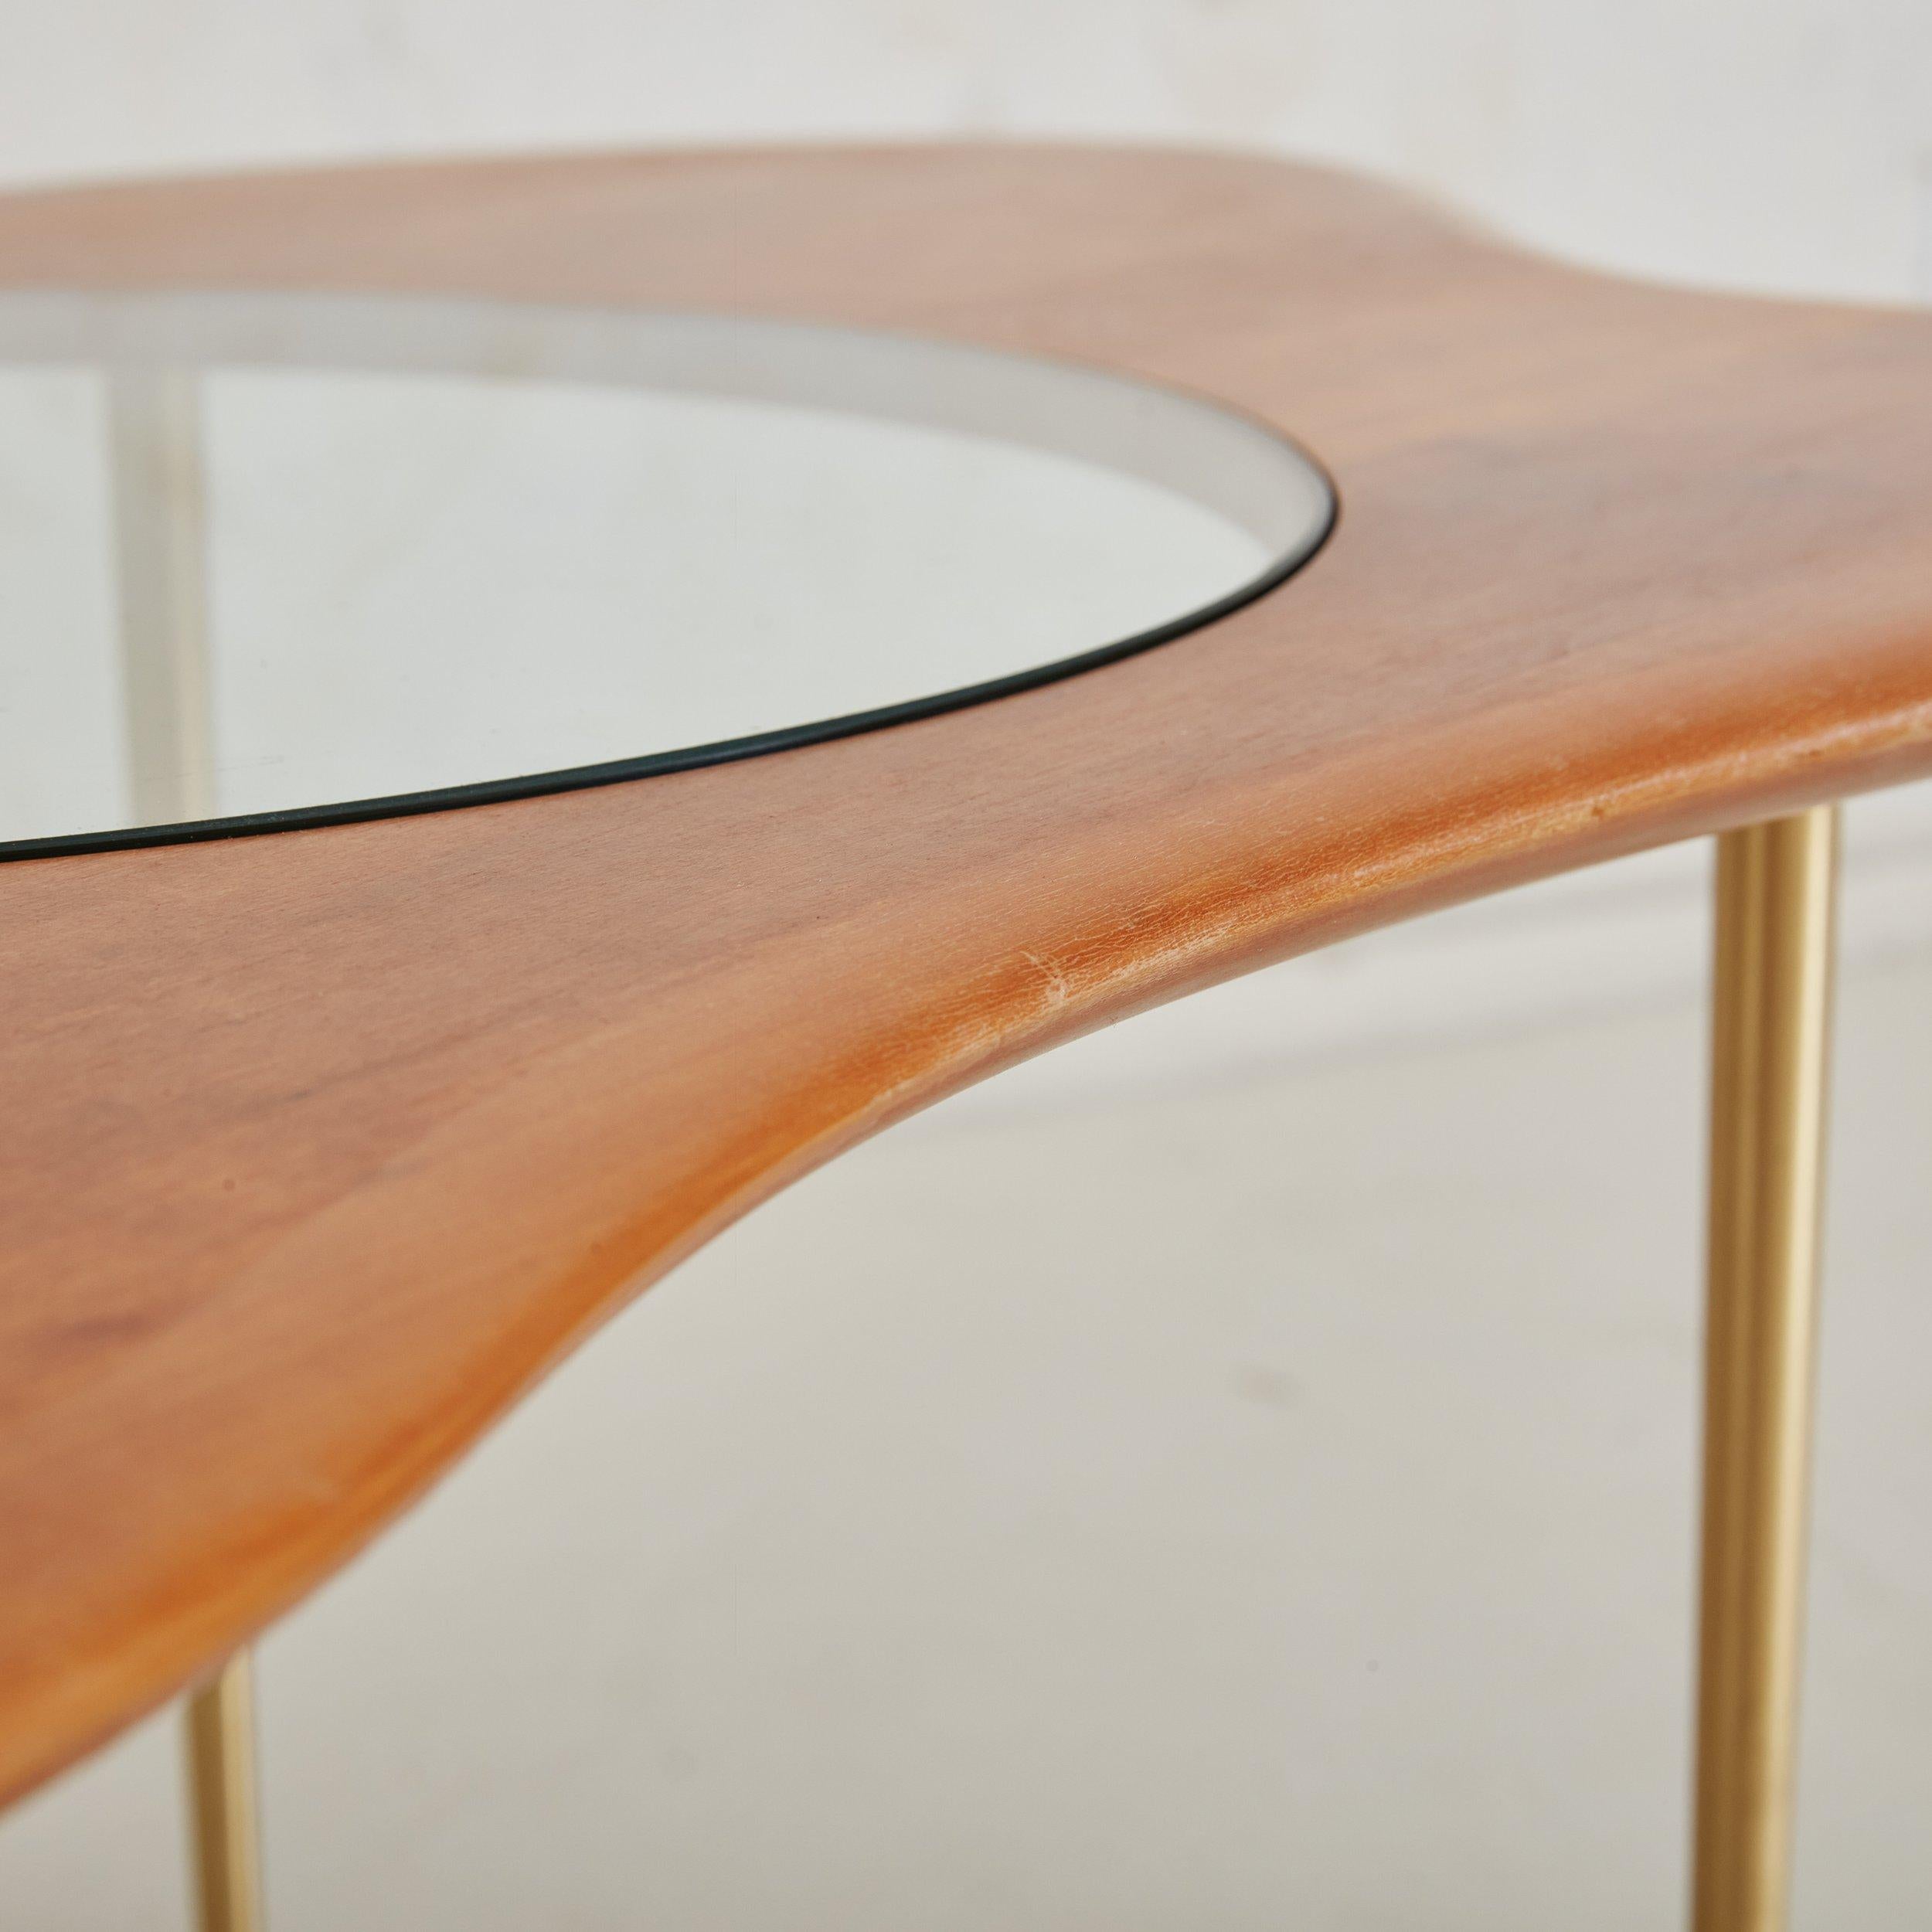 Cherry Wood + Glass Top Coffee Table with Brass Legs, Mid 20th Century For Sale 6